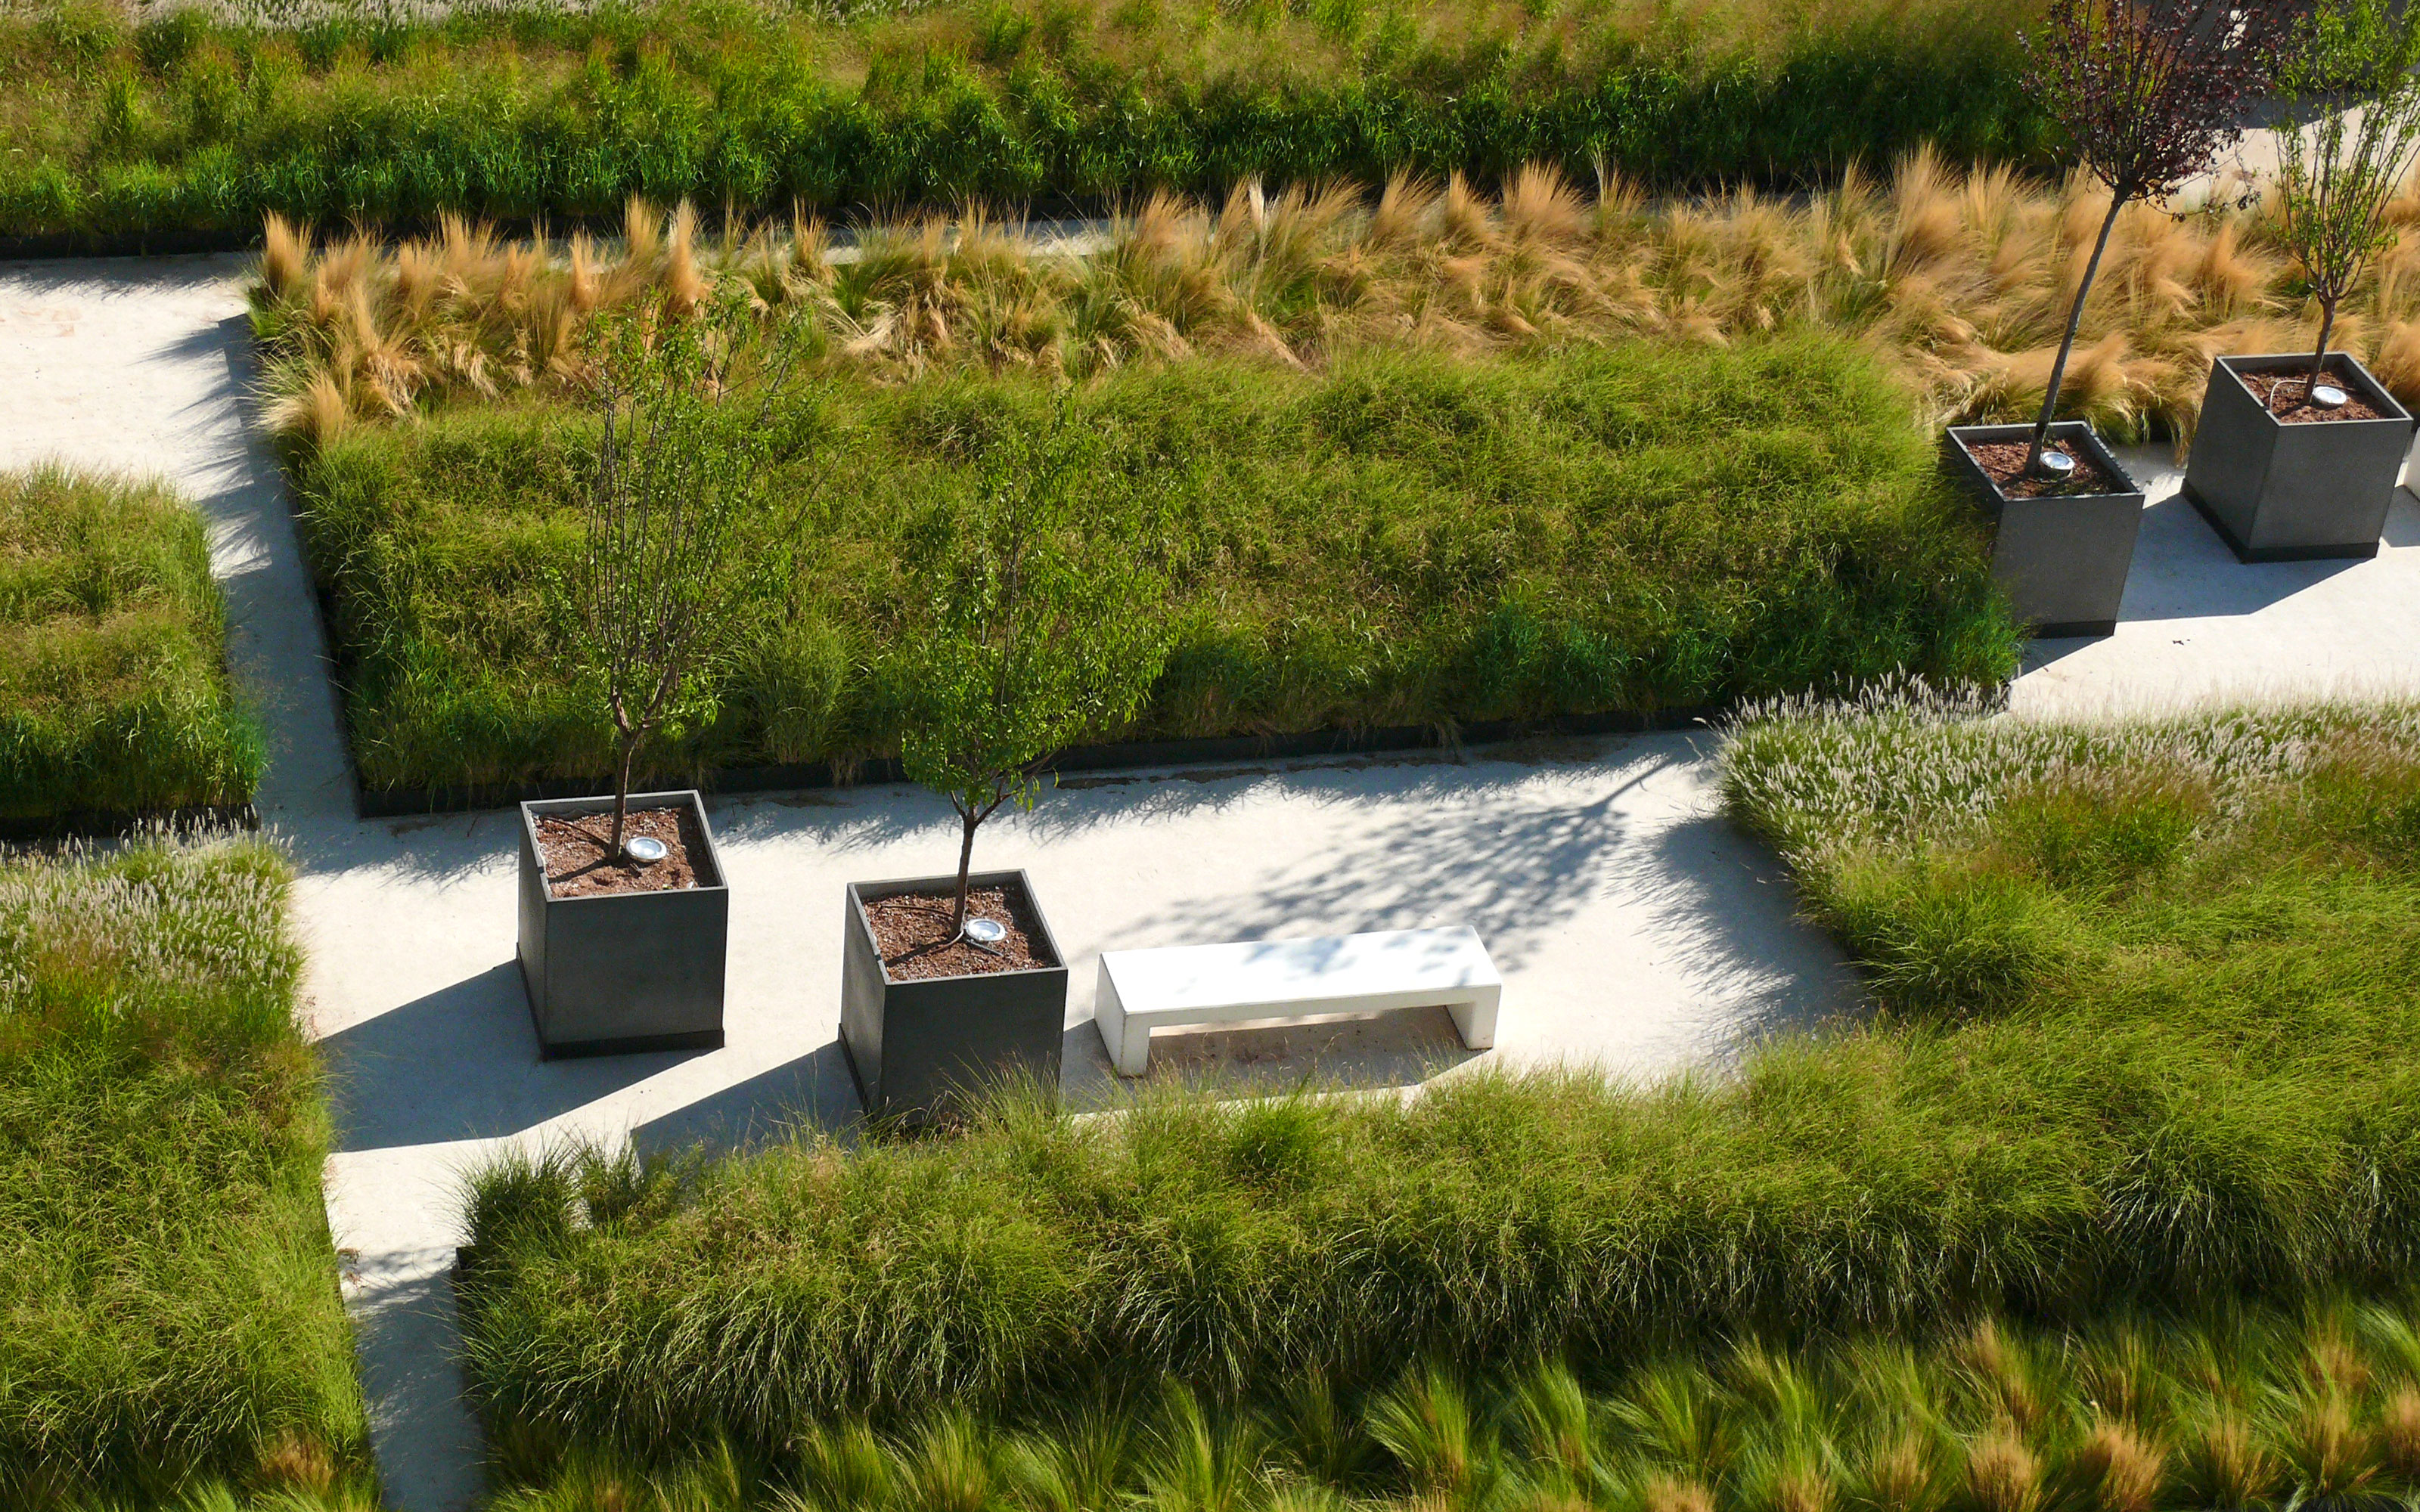 Bird's eye view onto a roof garden with ornamental grasses, planters and paved areas